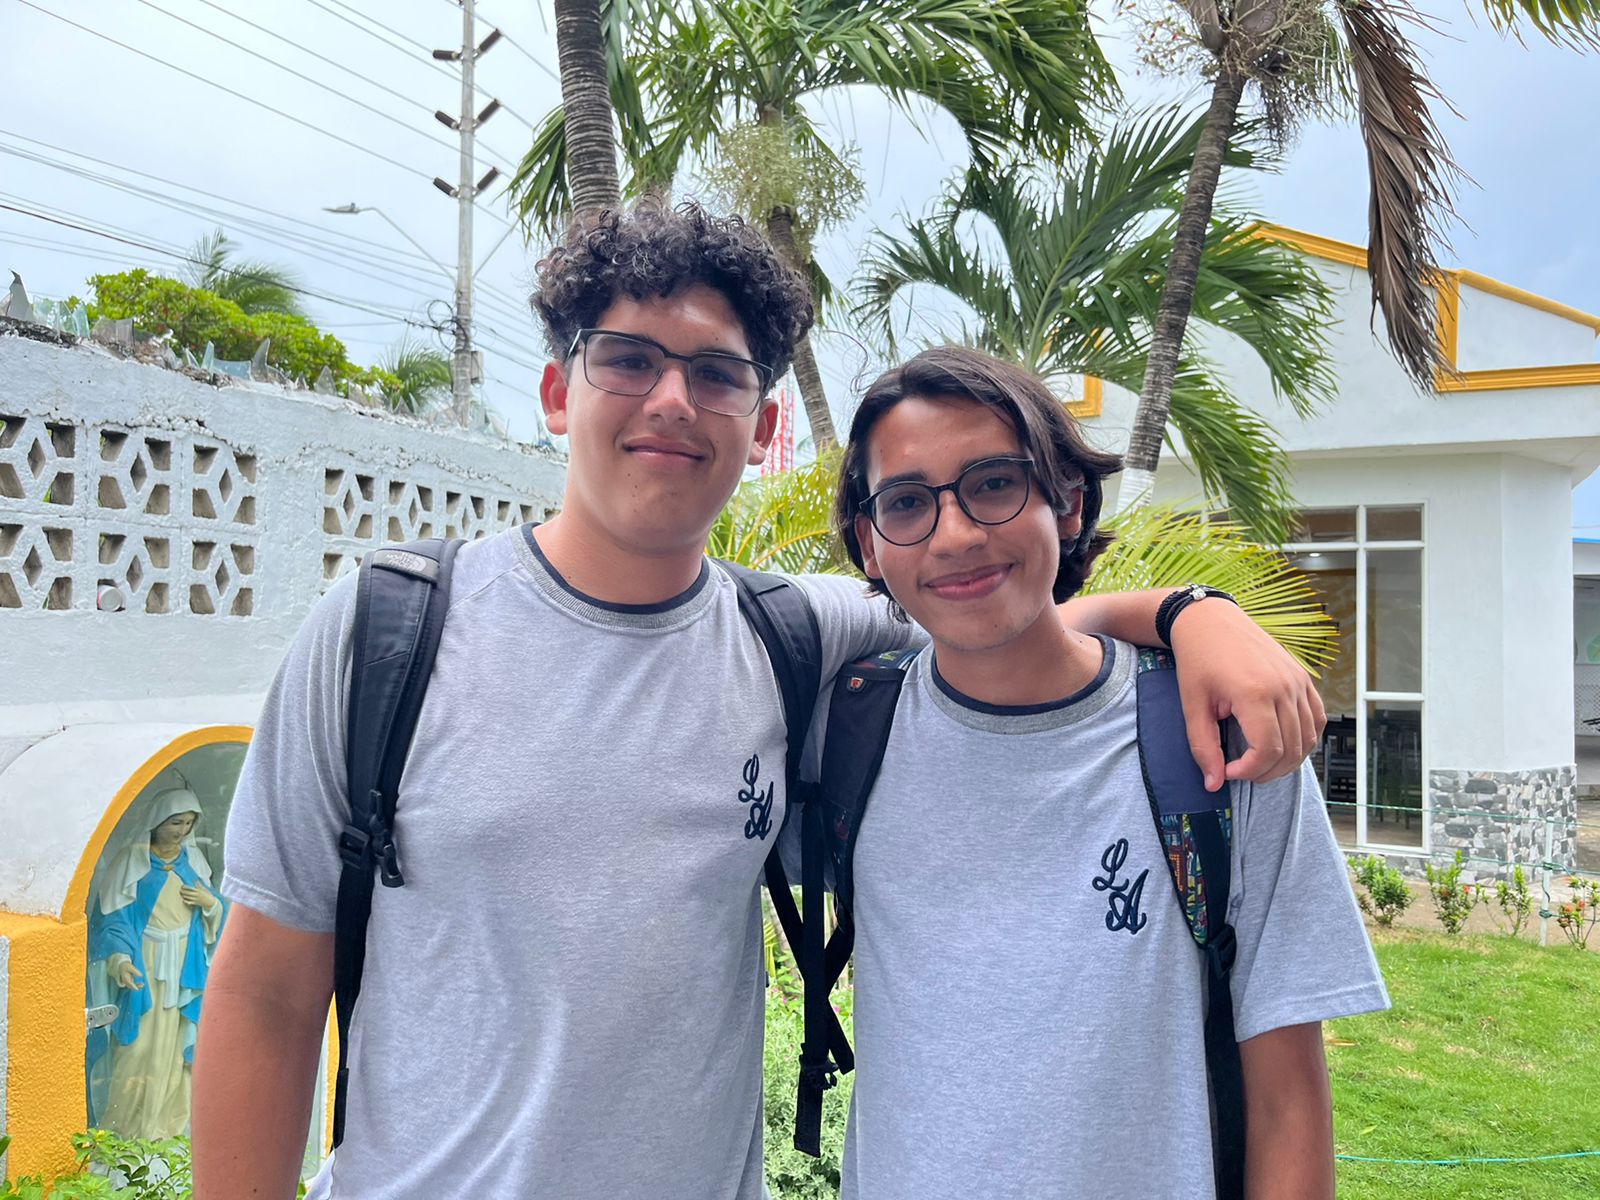 Jacobo and Giussepe are students at Colegio Luis Amigo de San Andrés, an institution focused on environmental education.